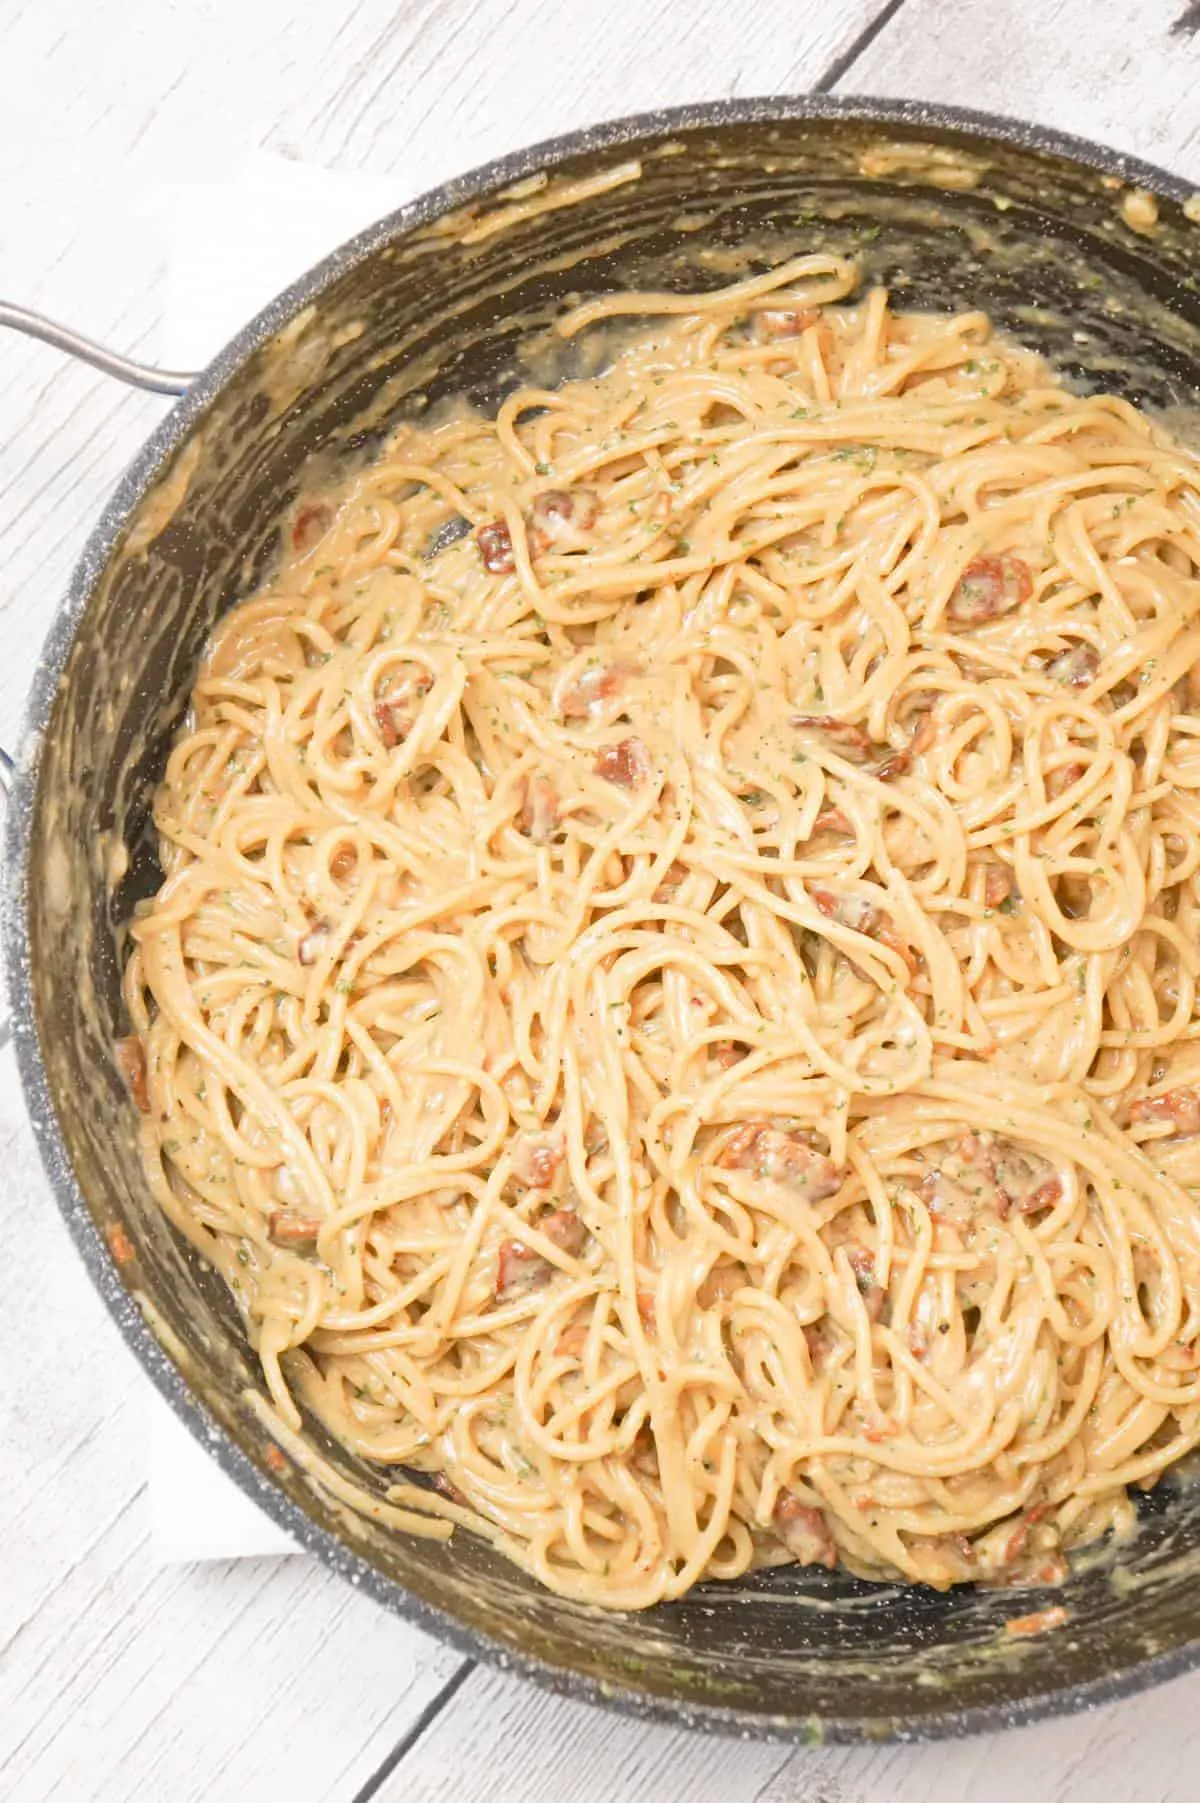 Spaghetti Carbonara is an easy pasta dish loaded with crispy bacon and tossed in an egg and Parmesan sauce.